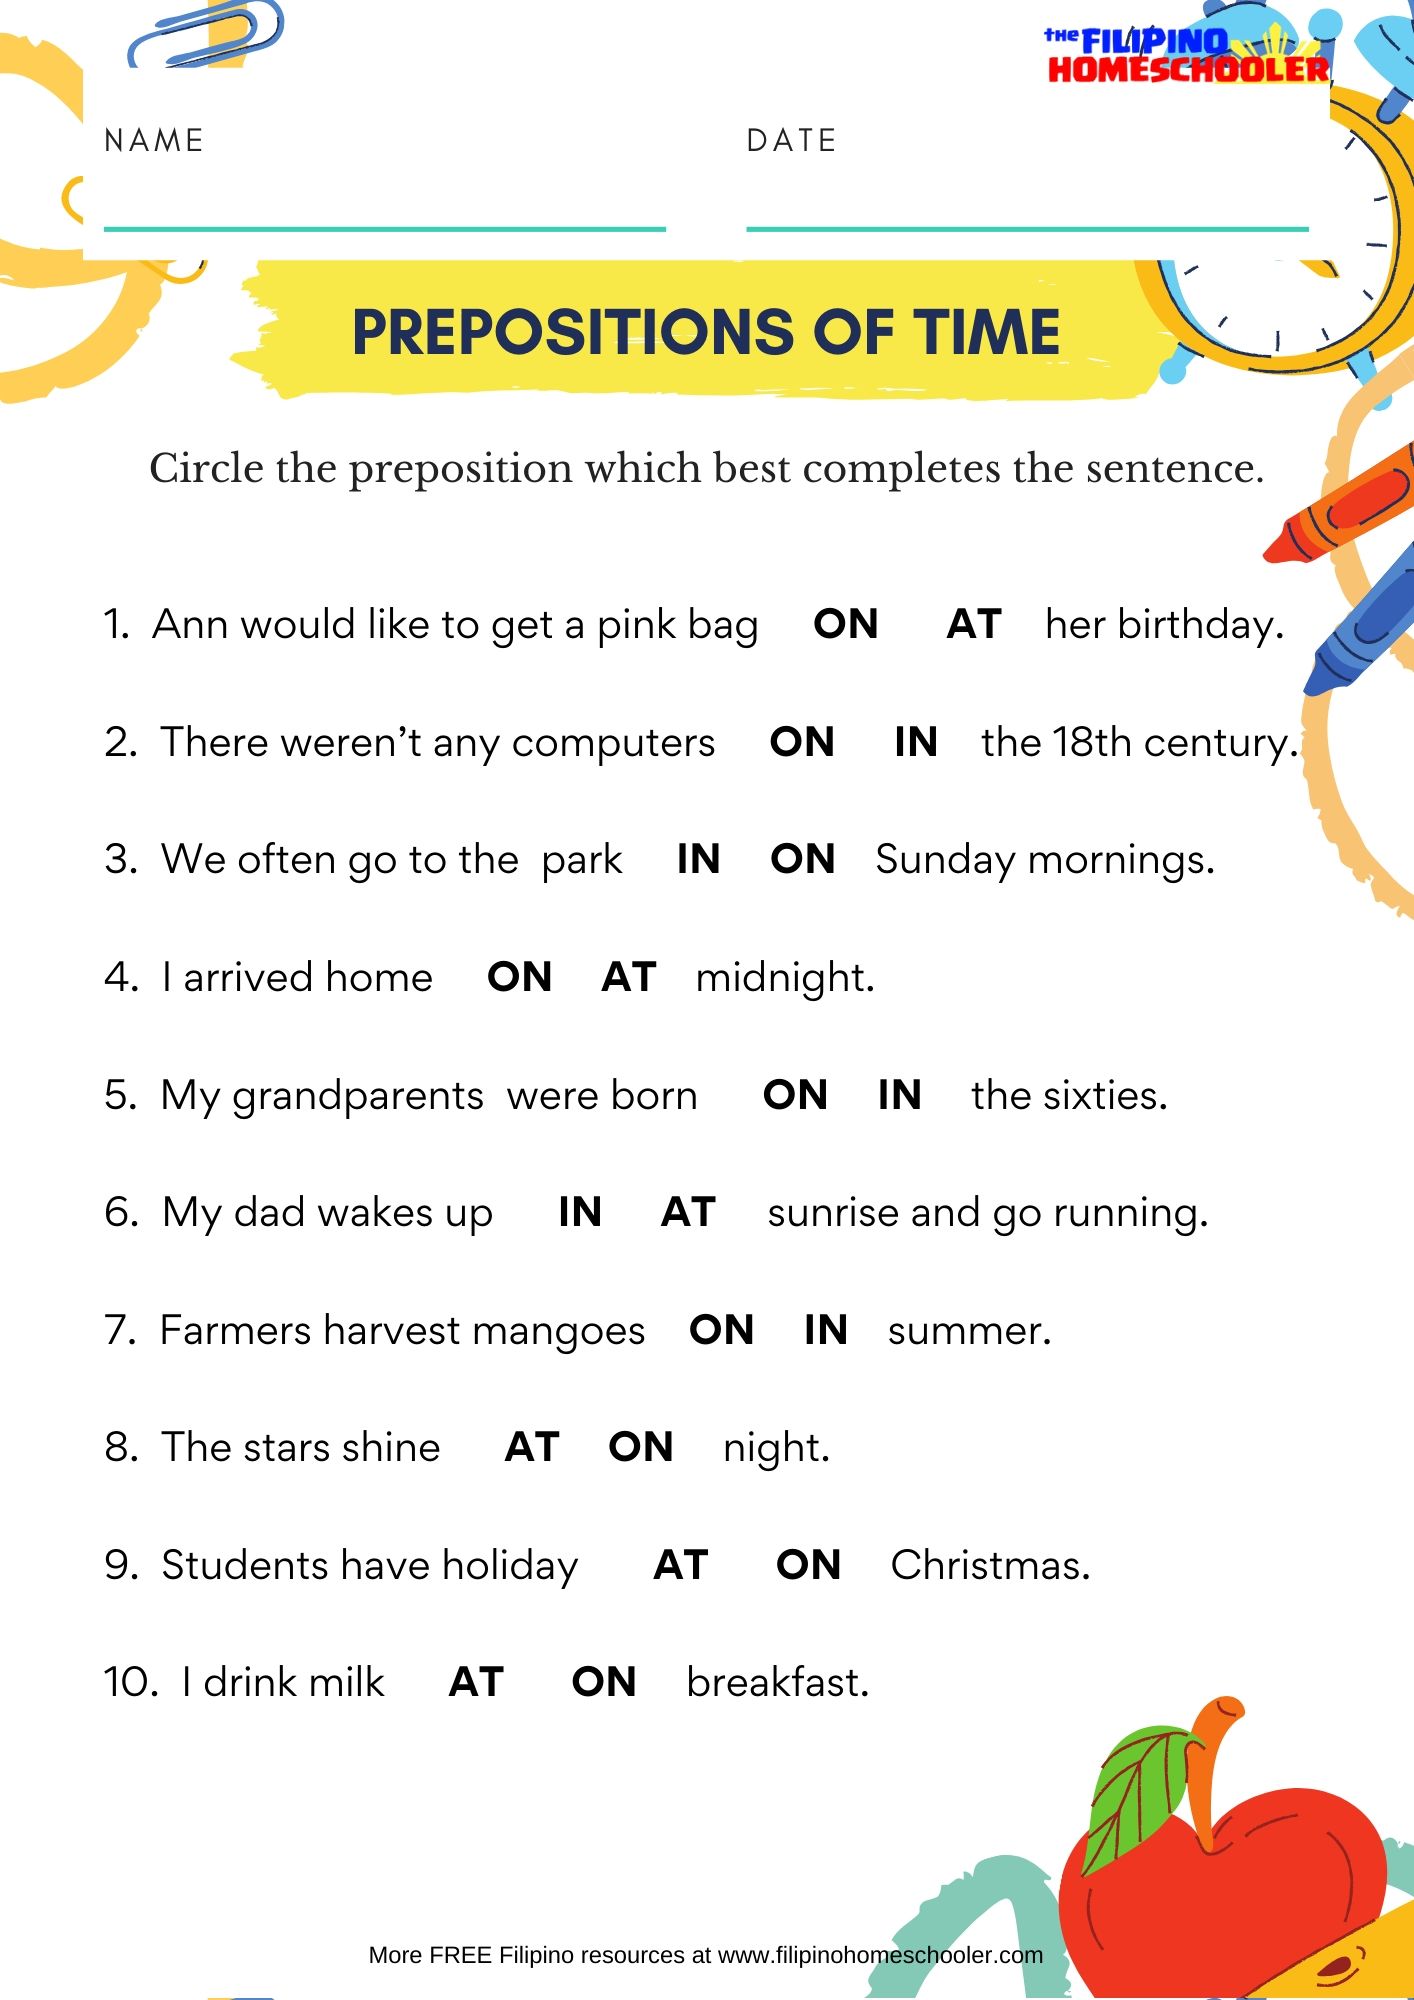 preposityions-grade-4-prepositional-phrases-activities-4th-grade-language-some-of-the